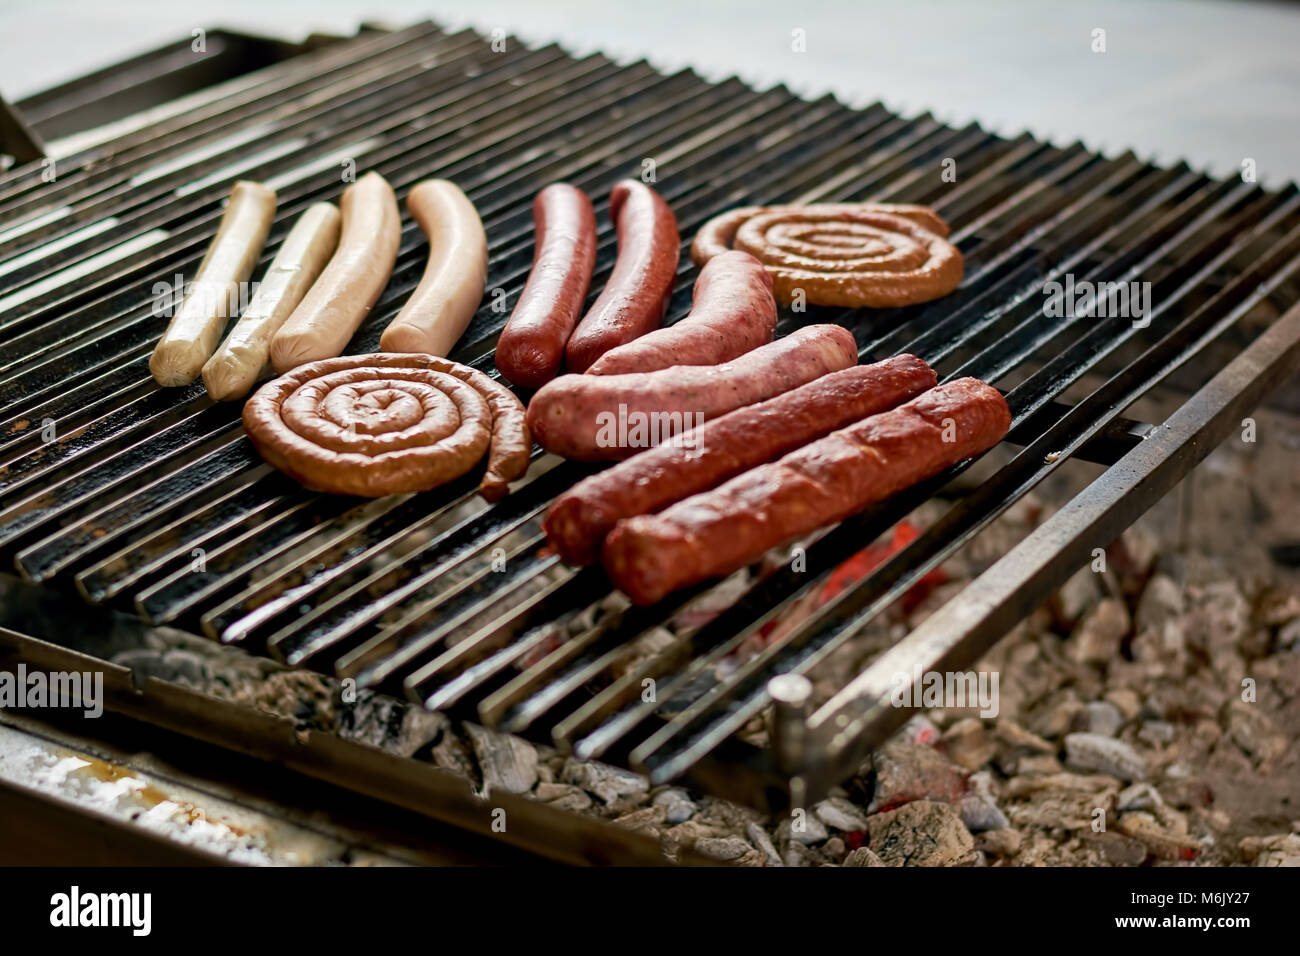 Assorted sausages grilling over coals on barbecue. Stock Photo